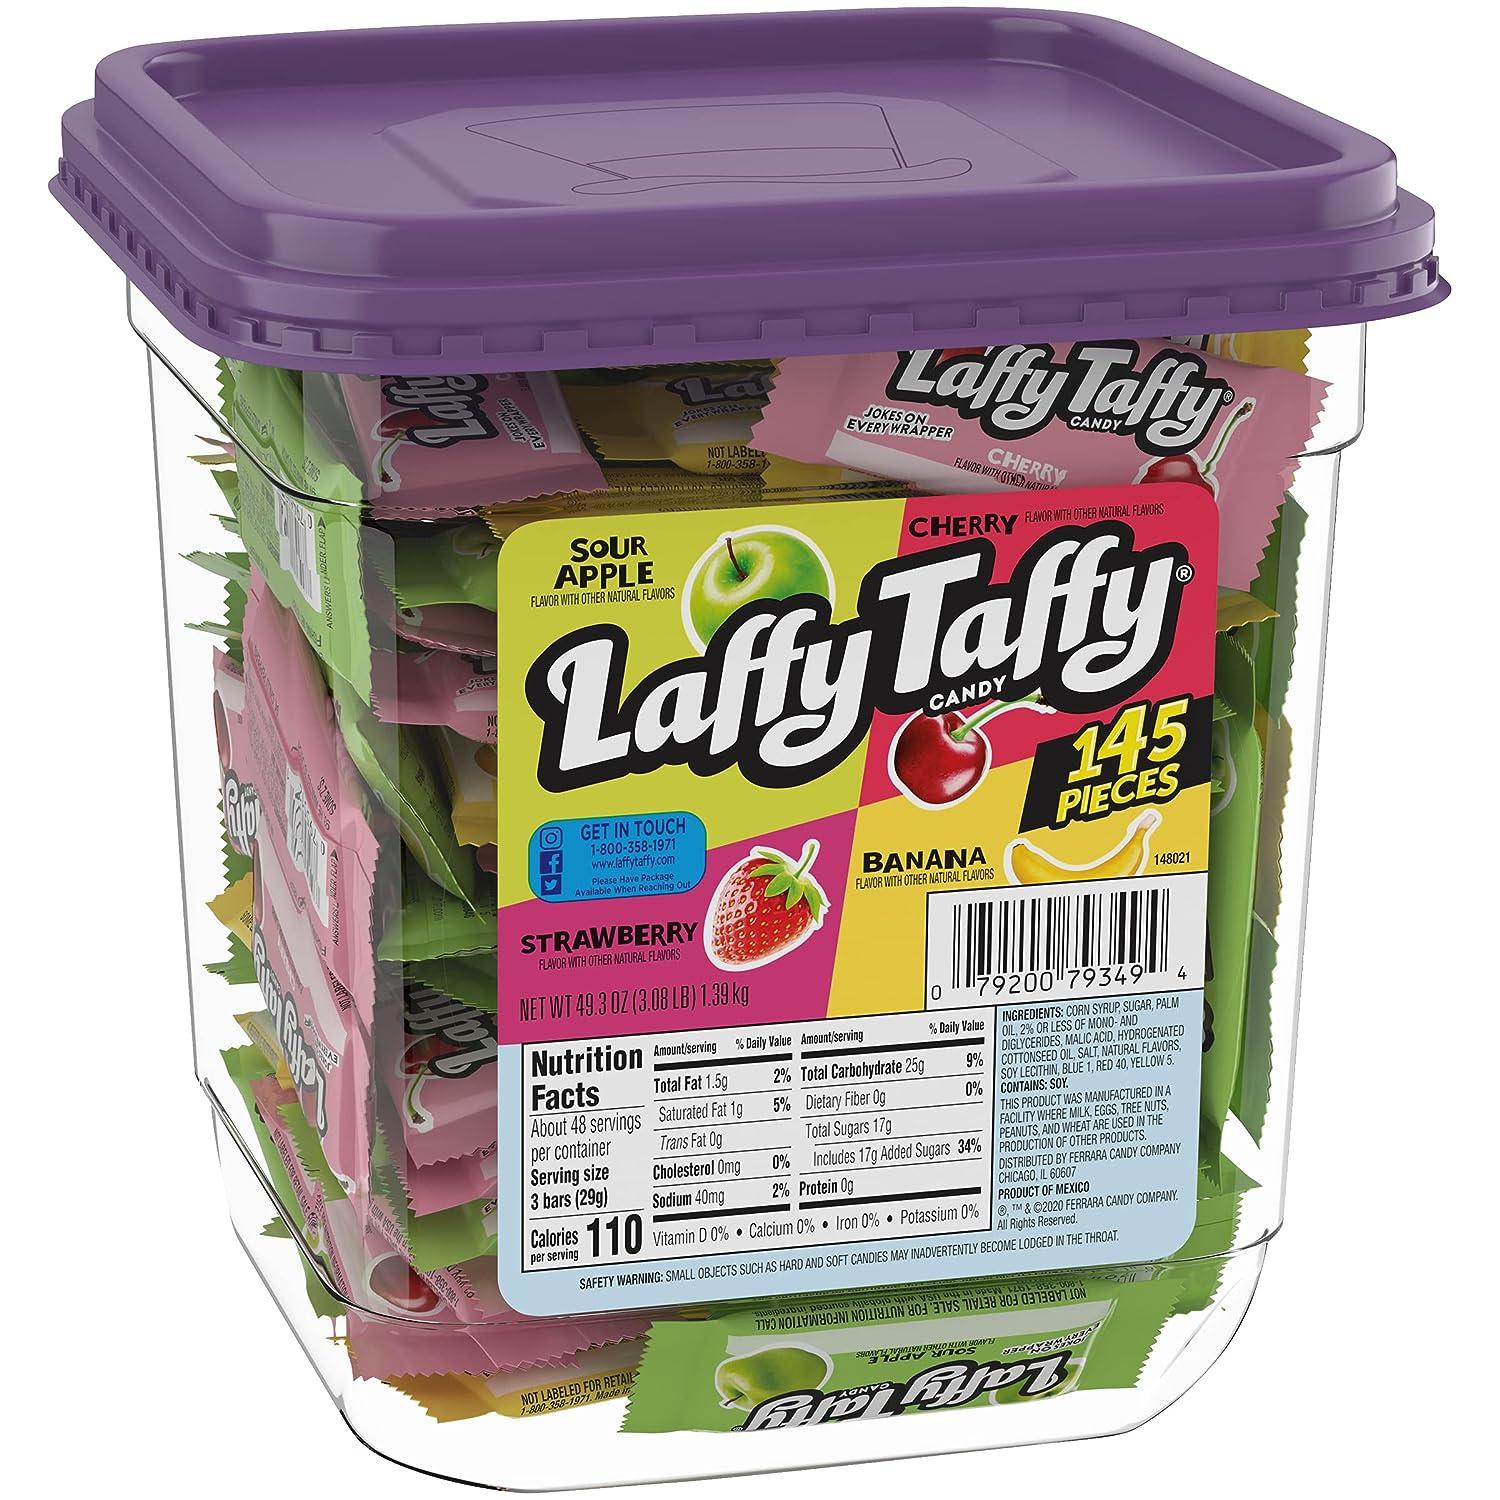 Laffy Taffy Candy Jar 145 Variety Pack for $10.24 Shipped